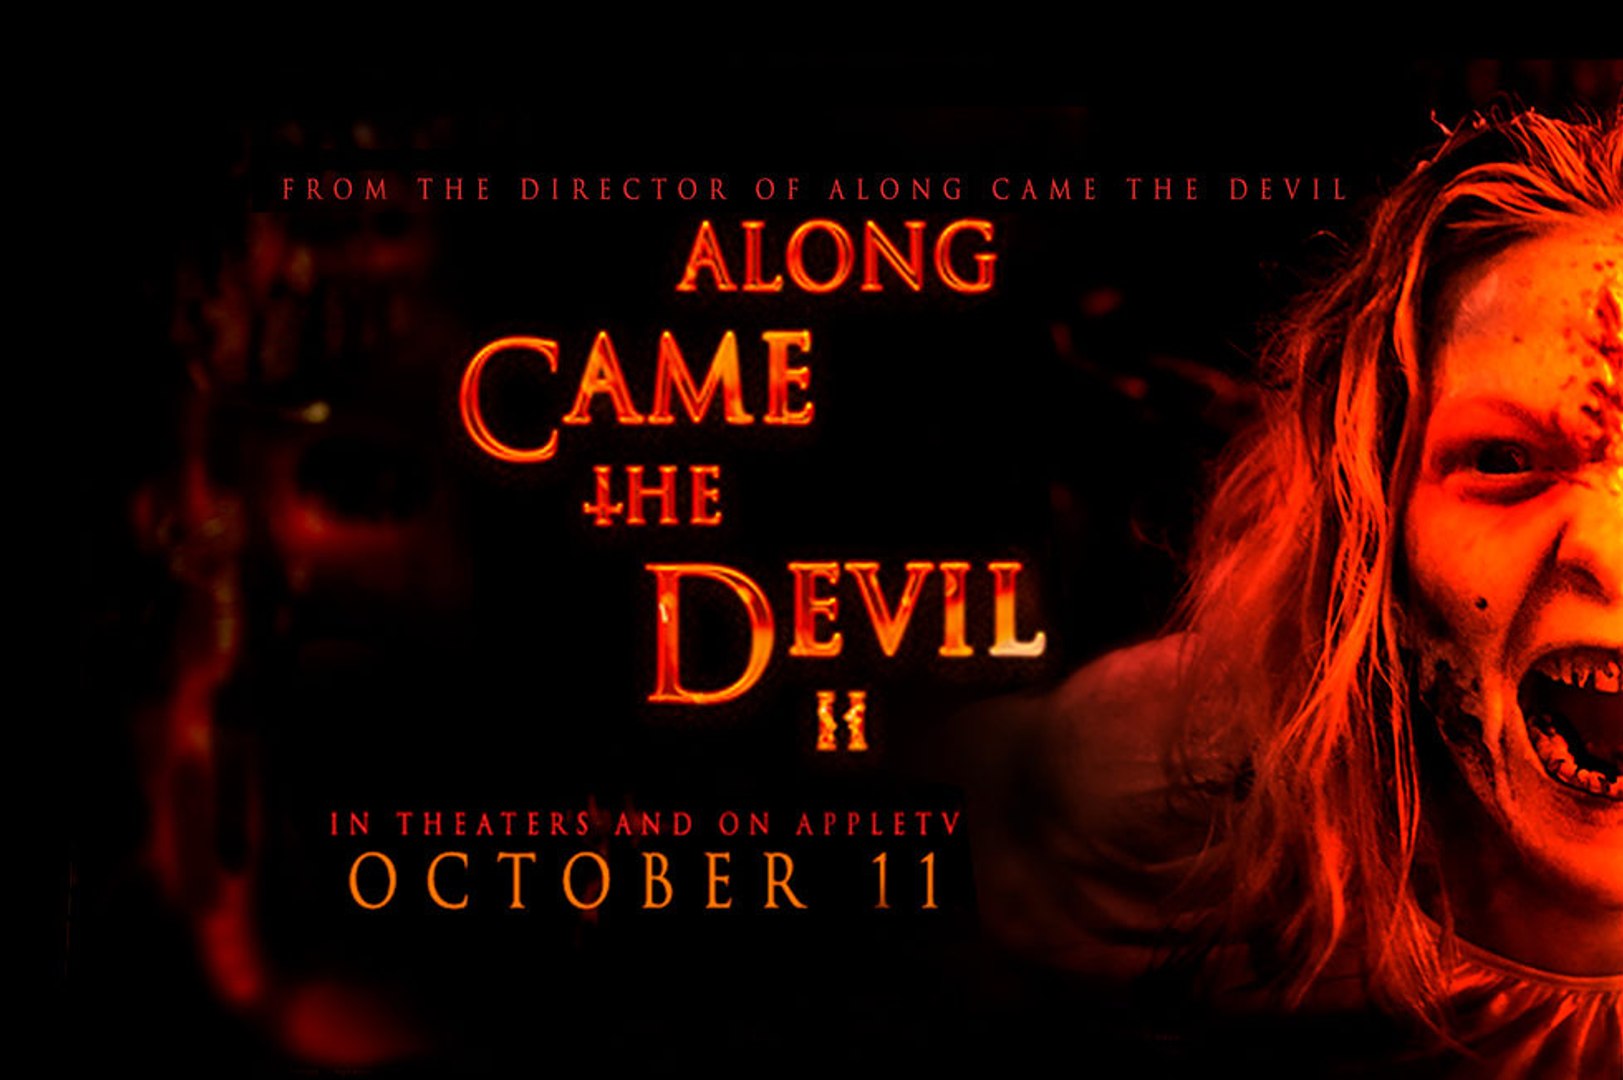 Along Came the Devil 2 Trailer (2019) Horror Movie - video Dailymotion